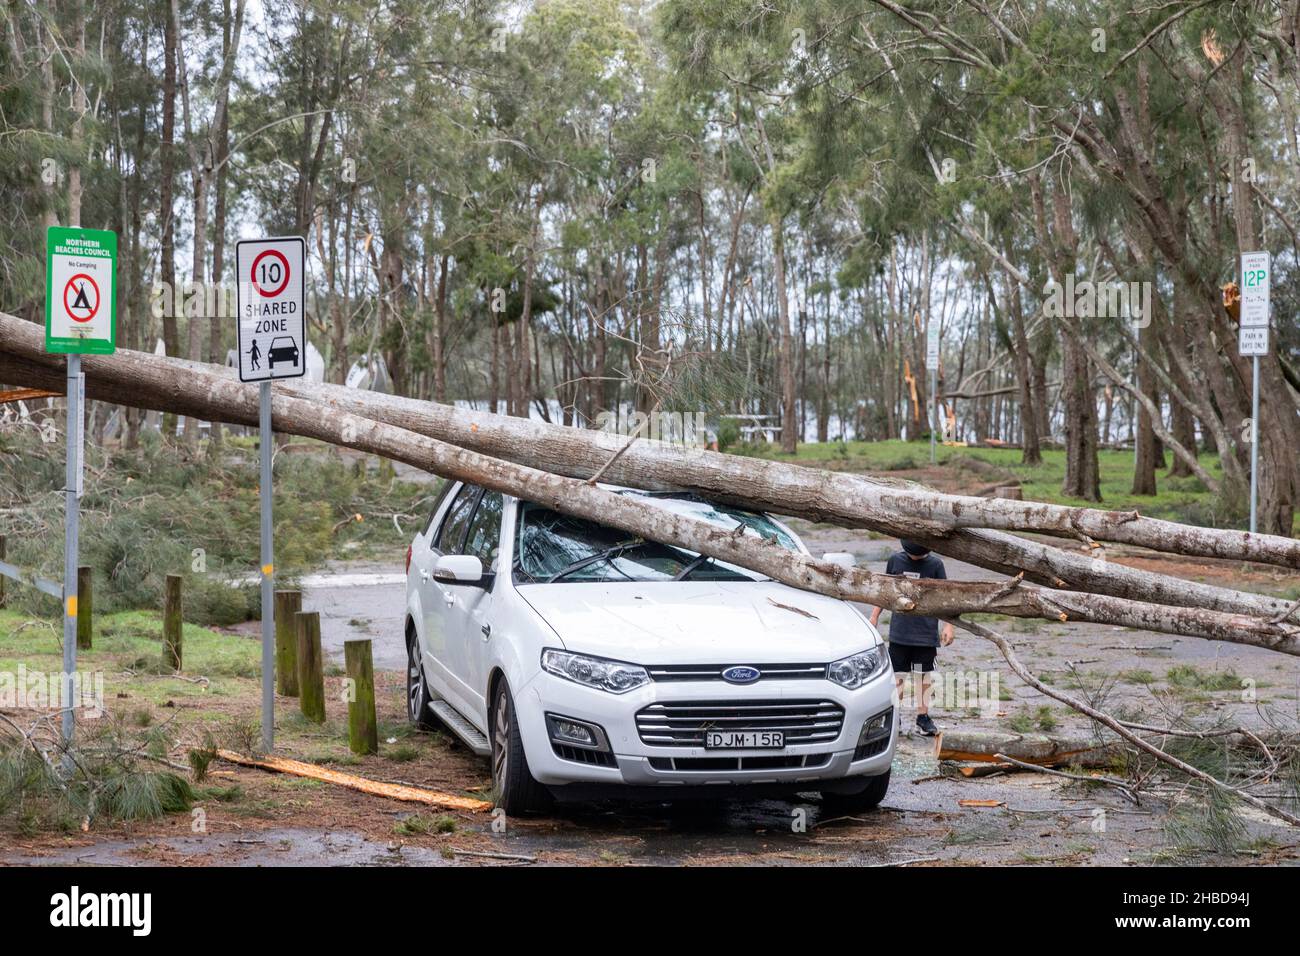 Narrabeen, Sydney, Australia. 19th Dec, 2021. Narrabeen, Sydney, Australia. 19th Dec 2021. Freak storm brought down trees and power lines on Sydney's northern beaches, one lady has died and others are critical, emergency services attended and plain clothes personnel at the scene of the fallen tree that killed a lady near Narrabeen Surf Club. Credit: martin berry/Alamy Live News Stock Photo